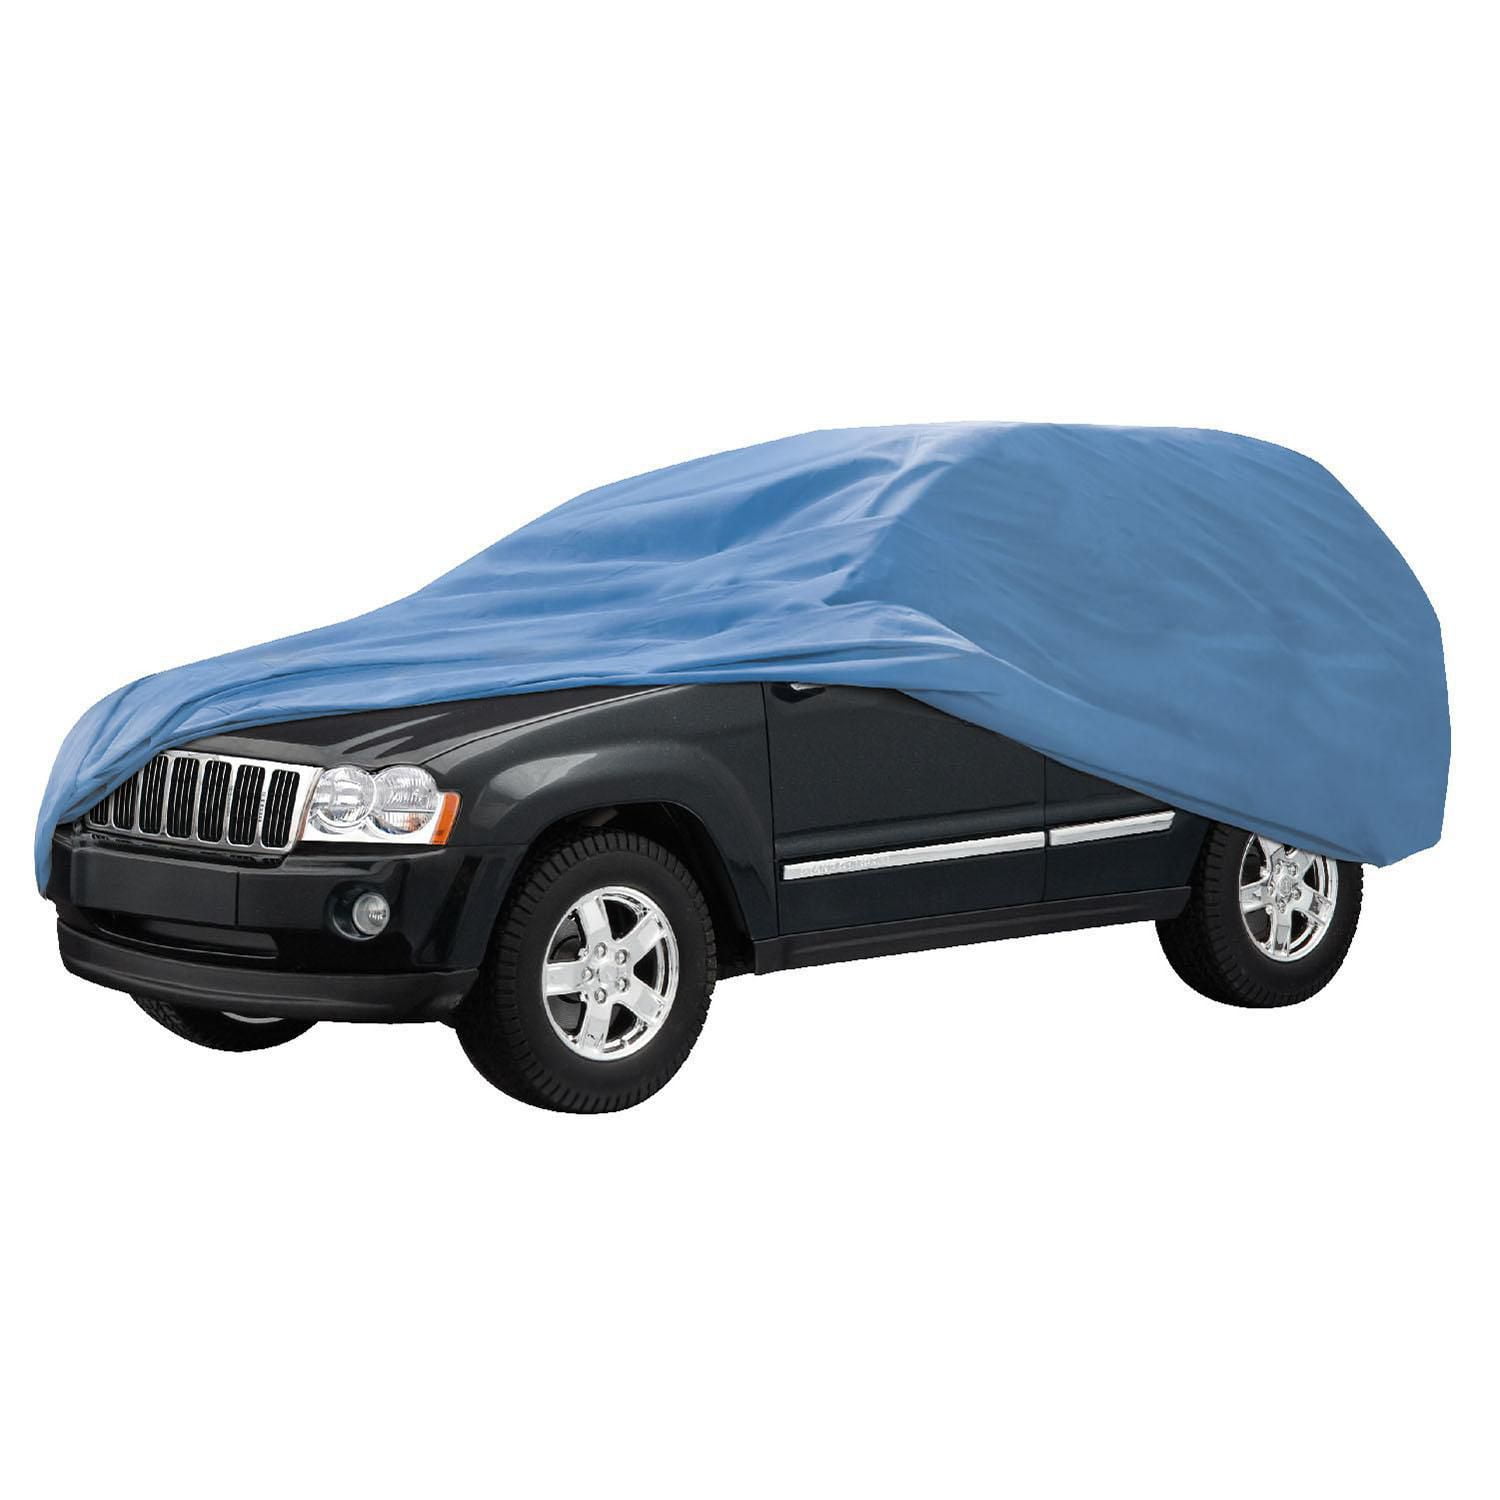 Autocraft SUV Cover Blue Layers Fits SUVs 13'-15' Medium-Duty  Water Resistant Outdoor Use, each, sold by each